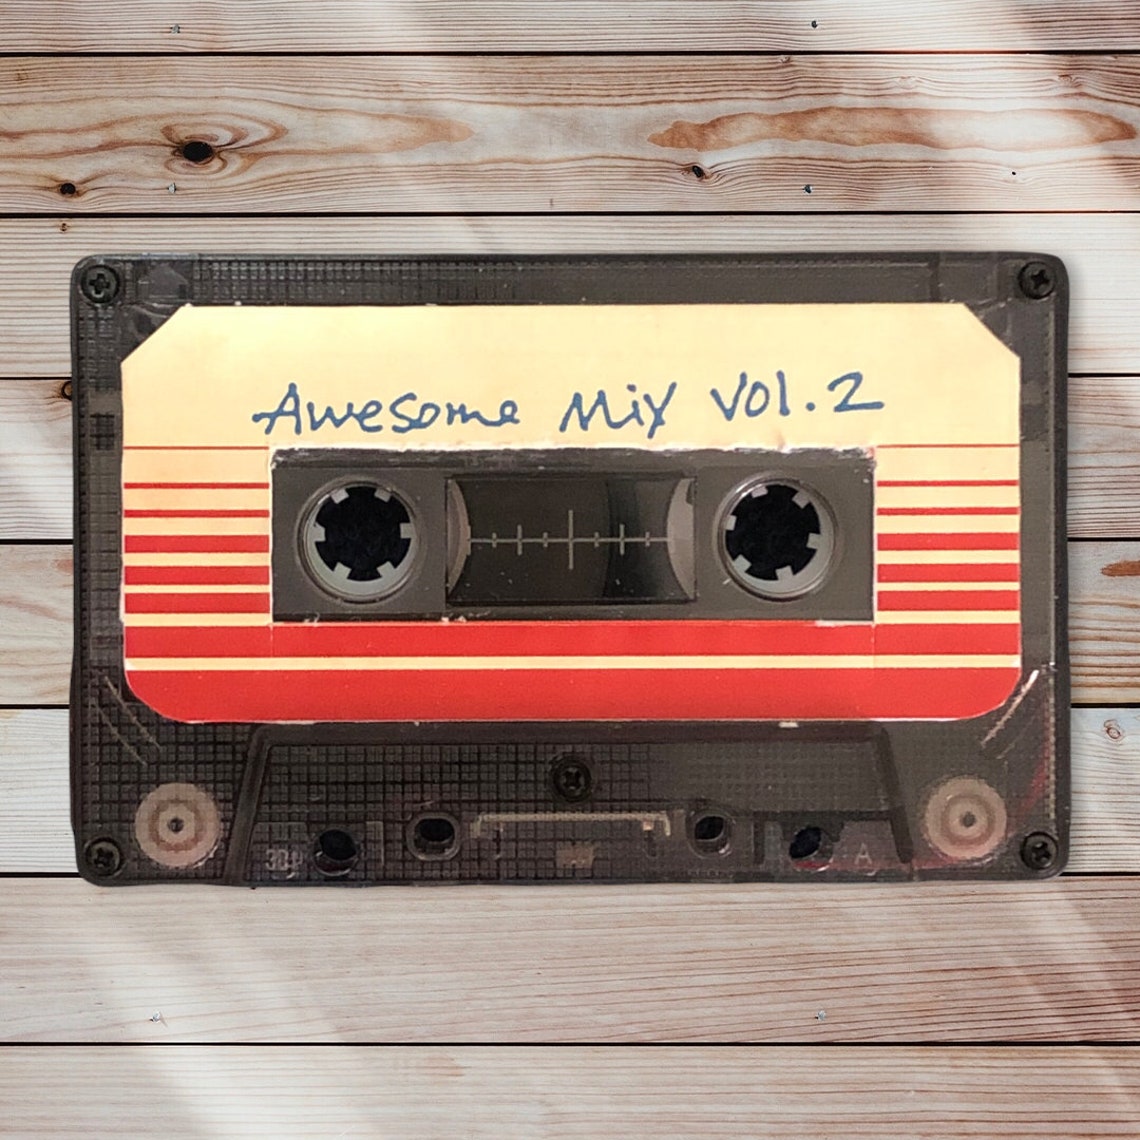 Awesome Mix Vol. 2 Cassette Tape Cassette Music - Etsy